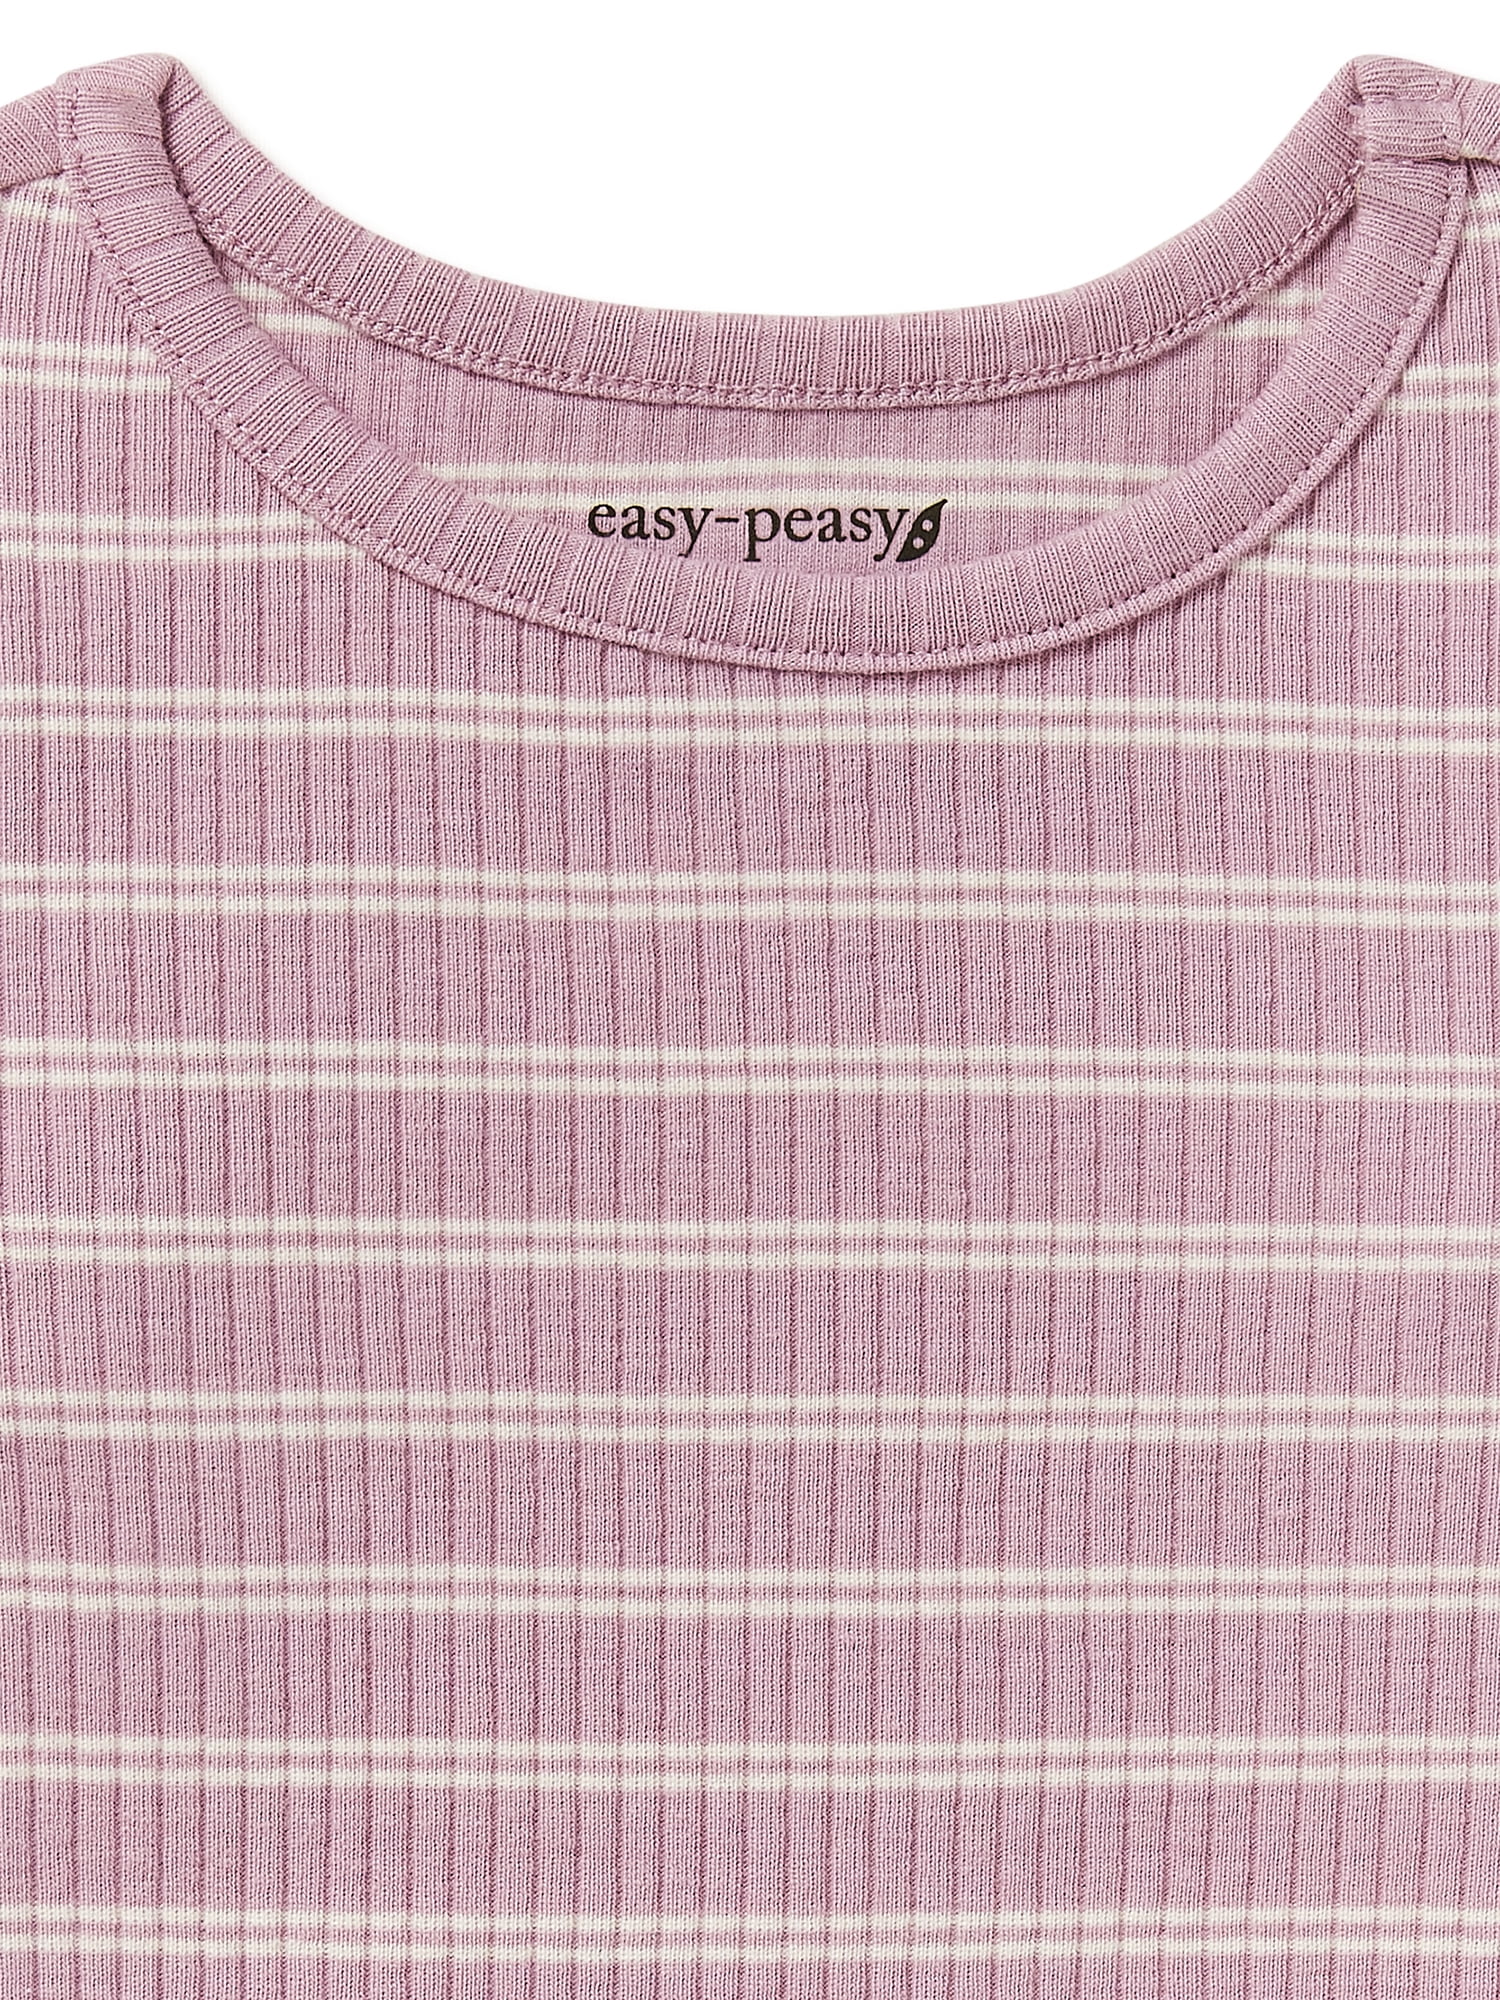 easy-peasy Baby and Toddler Girls Long Sleeve Lettuce Edge Top, Sizes 12  Months-5T